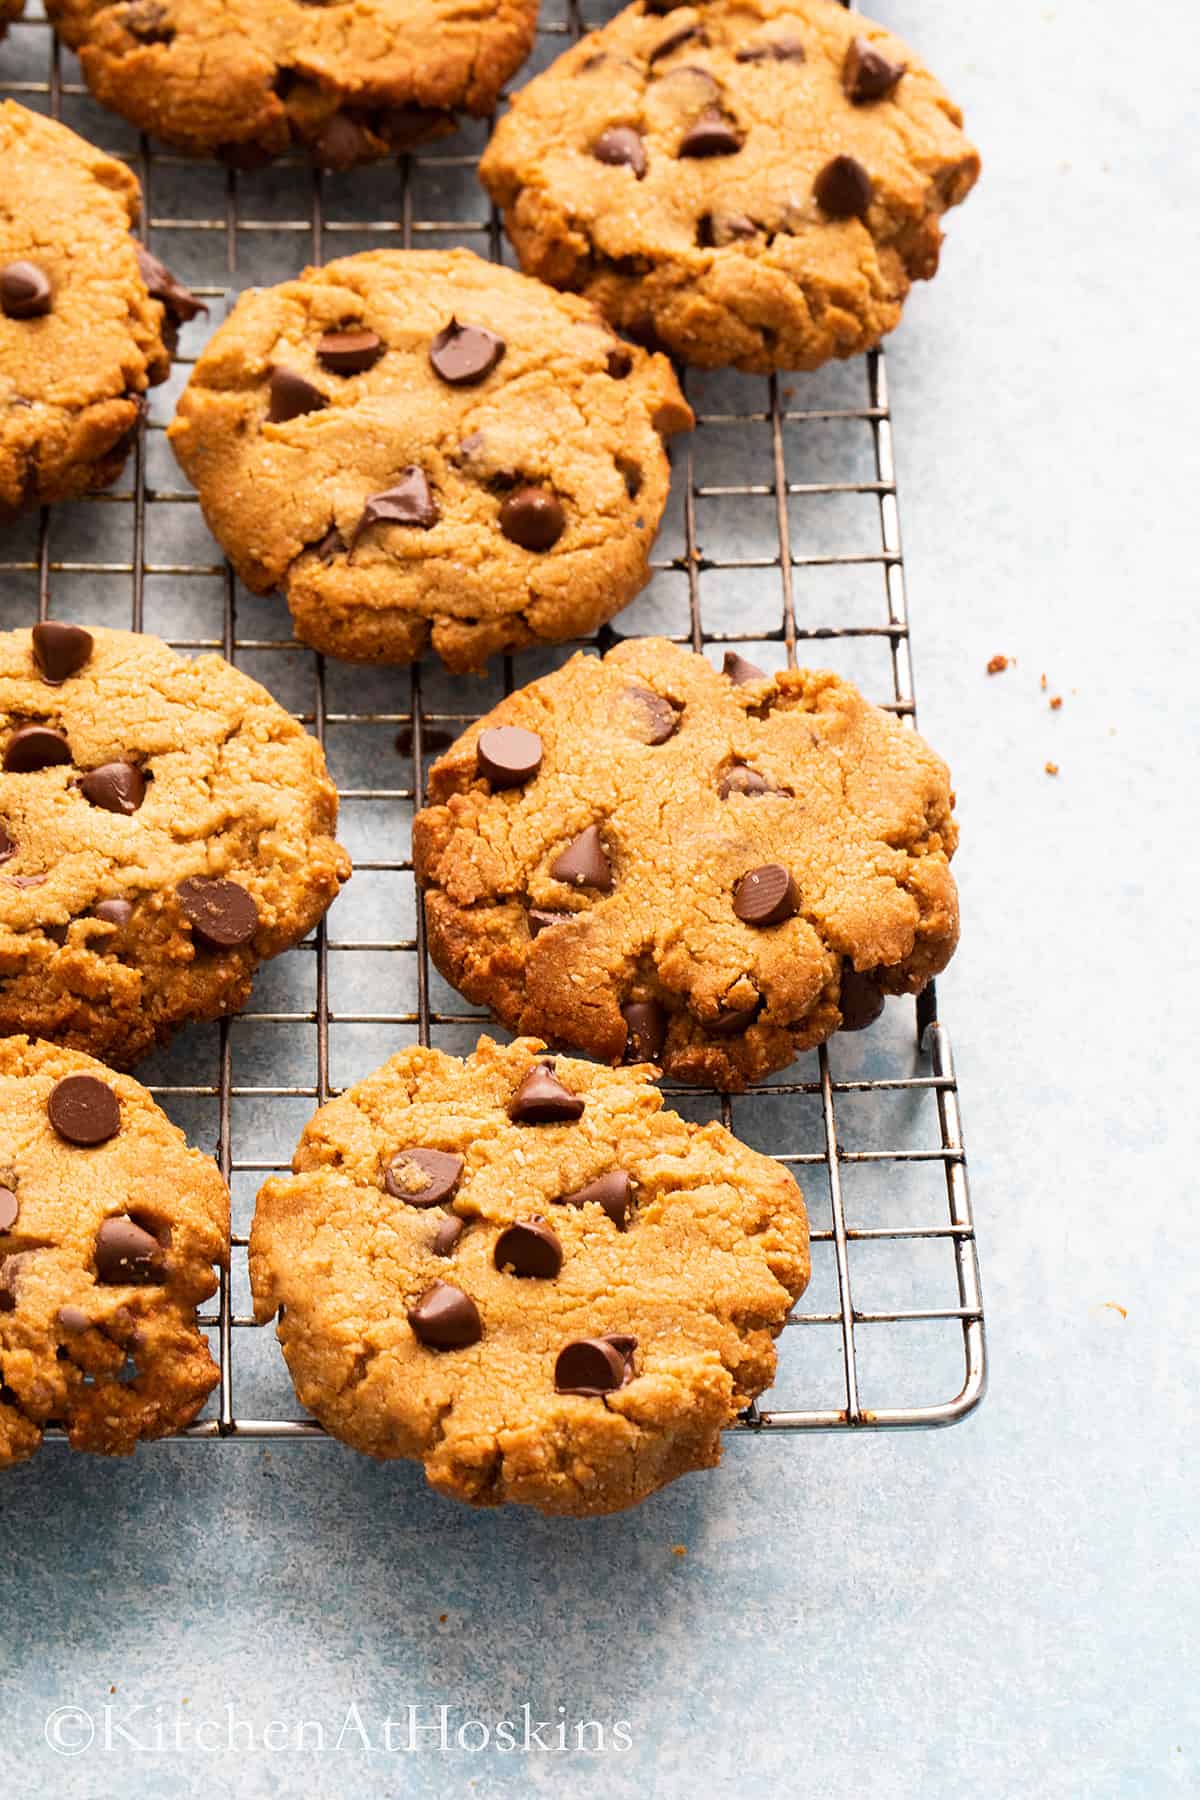 peanut butter almond flour cookies with chocolate chips.